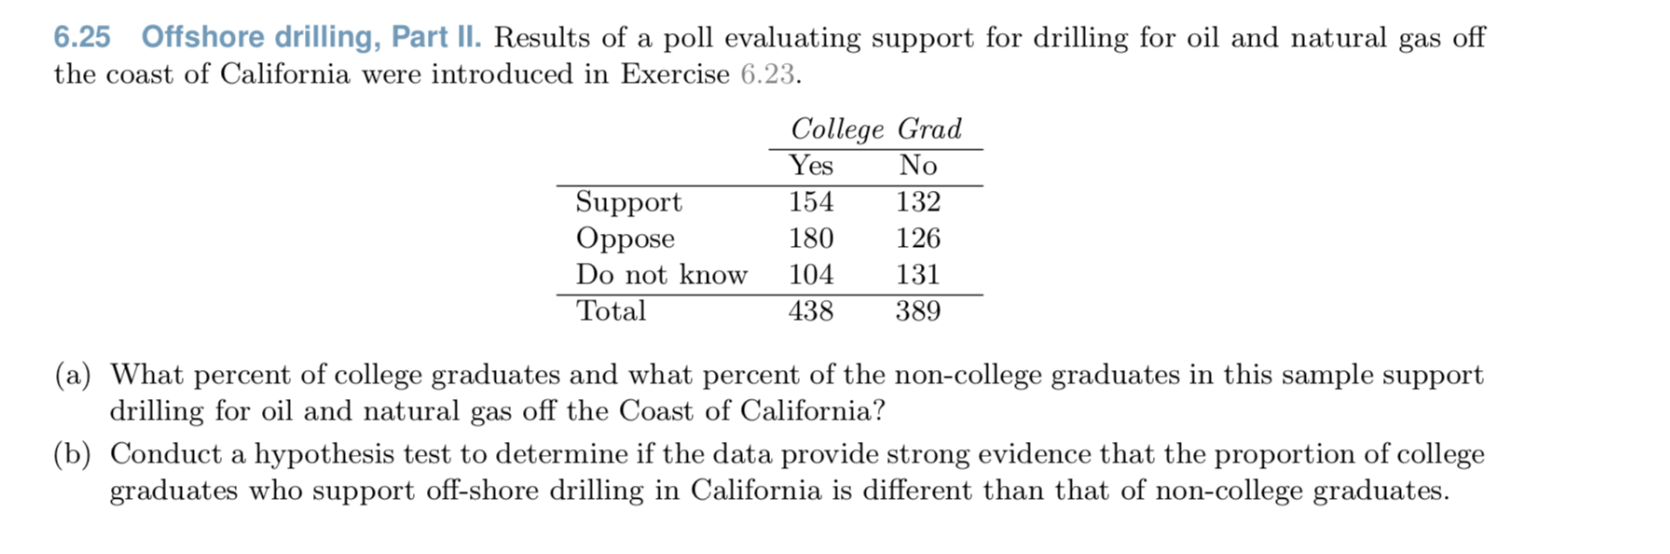 6.25 Offshore drilling, Part II. Results of a poll evaluating support for drilling for oil and natural gas off
the coast of California were introduced in Exercise 6.23.
College Grad
Yes
No
Support
Oppose
Do not know
154
132
180
126
104
131
Total
438
389
(a) What percent of college graduates and what percent of the non-college graduates in this sample support
drilling for oil and natural gas off the Coast of California?
(b) Conduct a hypothesis test to determine if the data provide strong evidence that the proportion of college
graduates who support off-shore drilling in California is different than that of non-college graduates.
